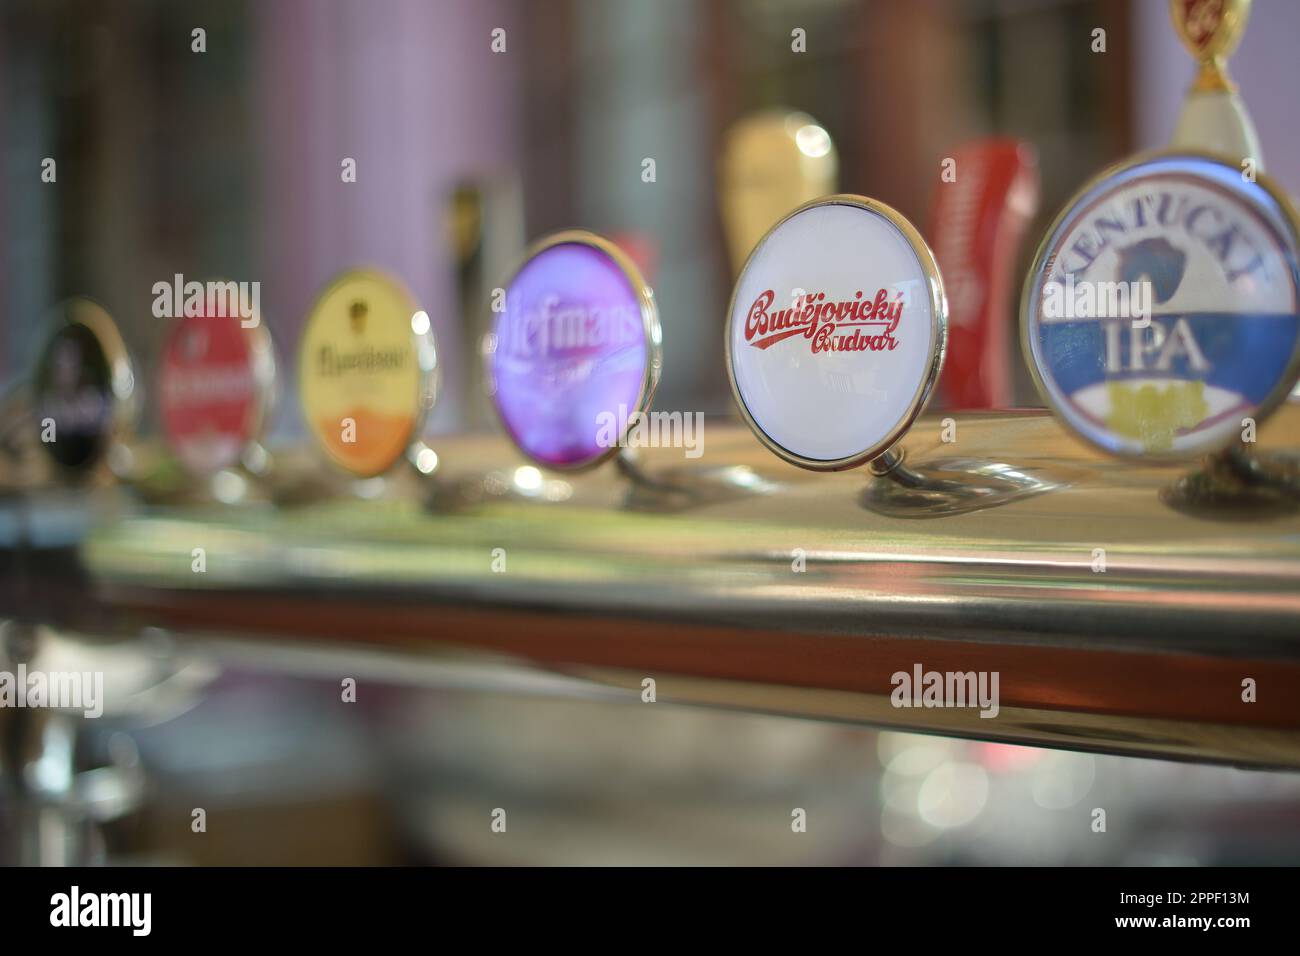 Handles of different brands of draft beer on a bar counter Stock Photo